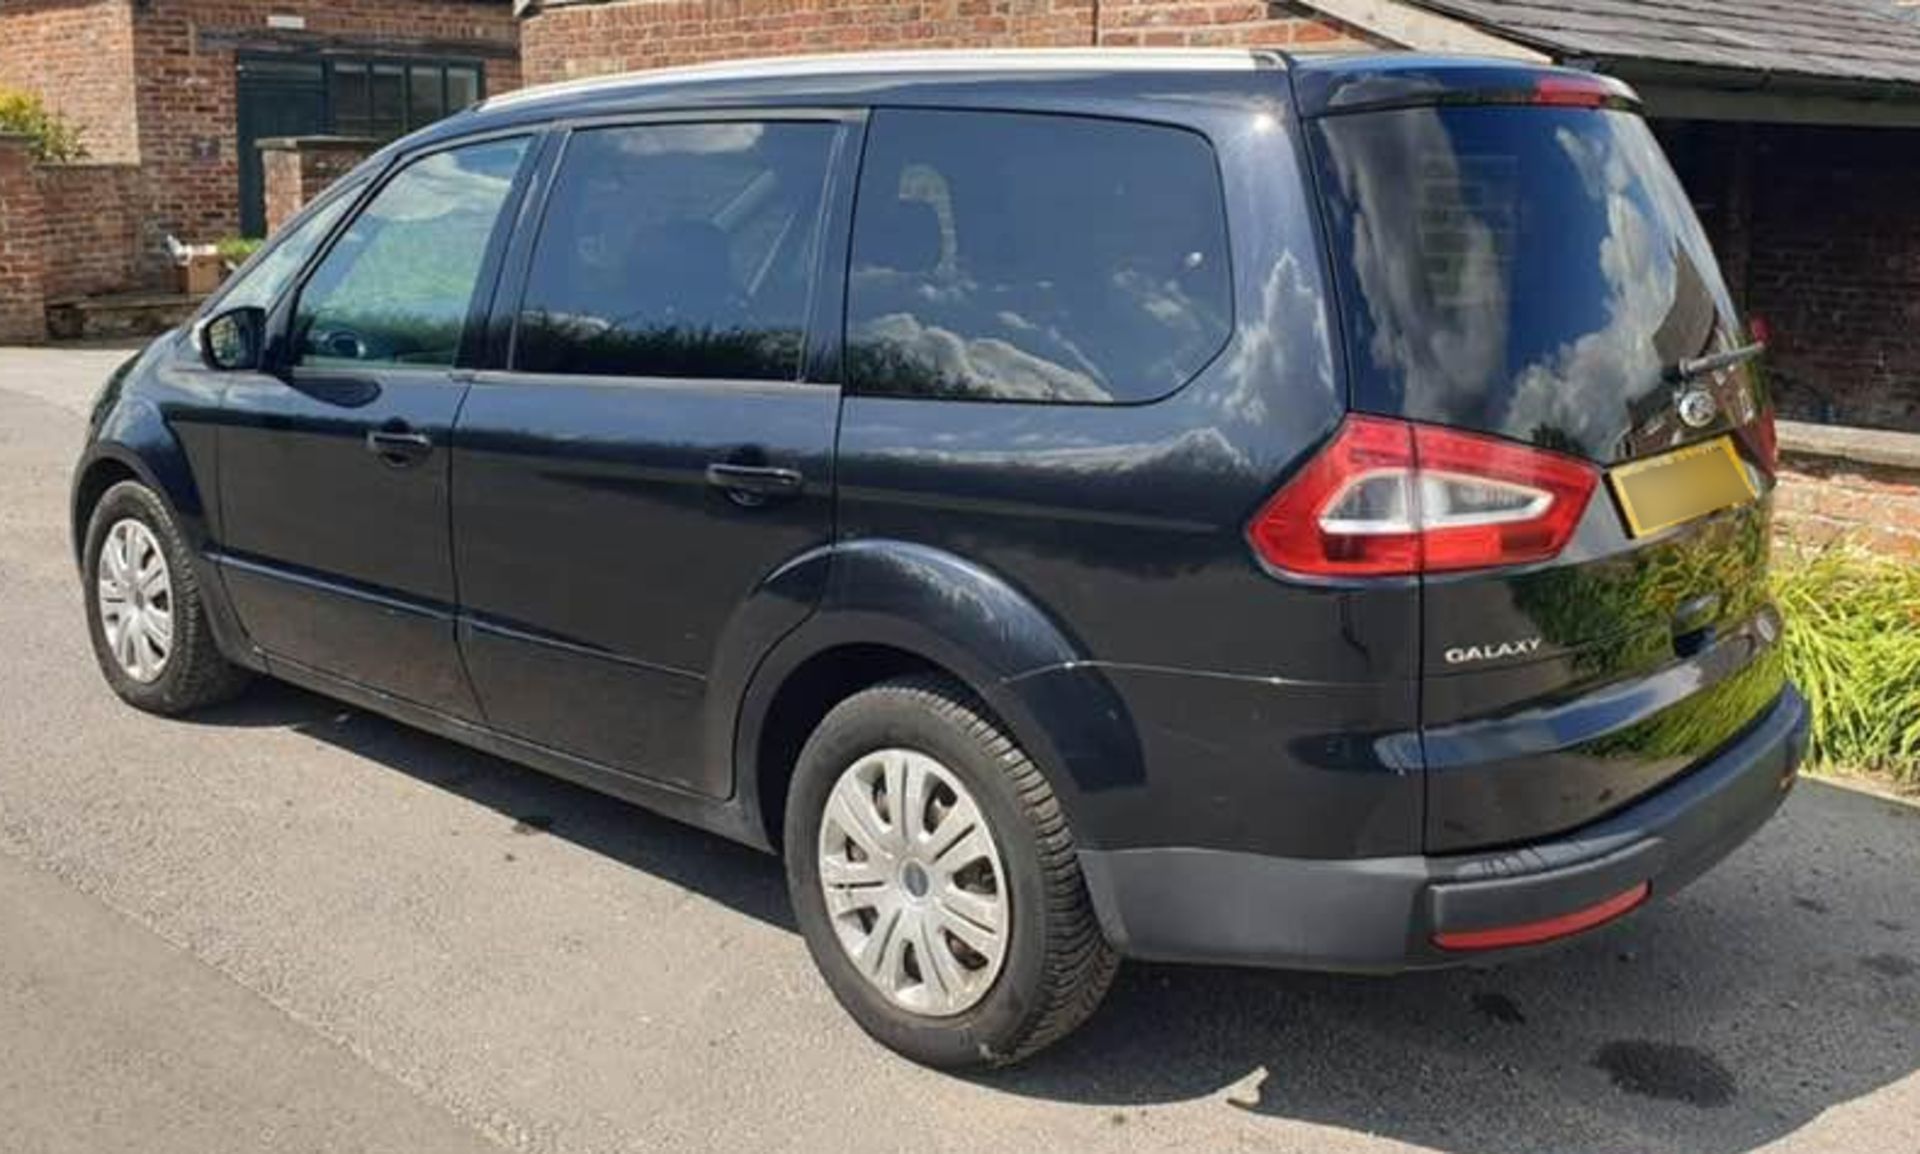 1 x 2014 Ford Galaxy 7-Seater Diesel MPV - Automatic - Black - 126000 Miles - CL331 - Location: - Image 8 of 9